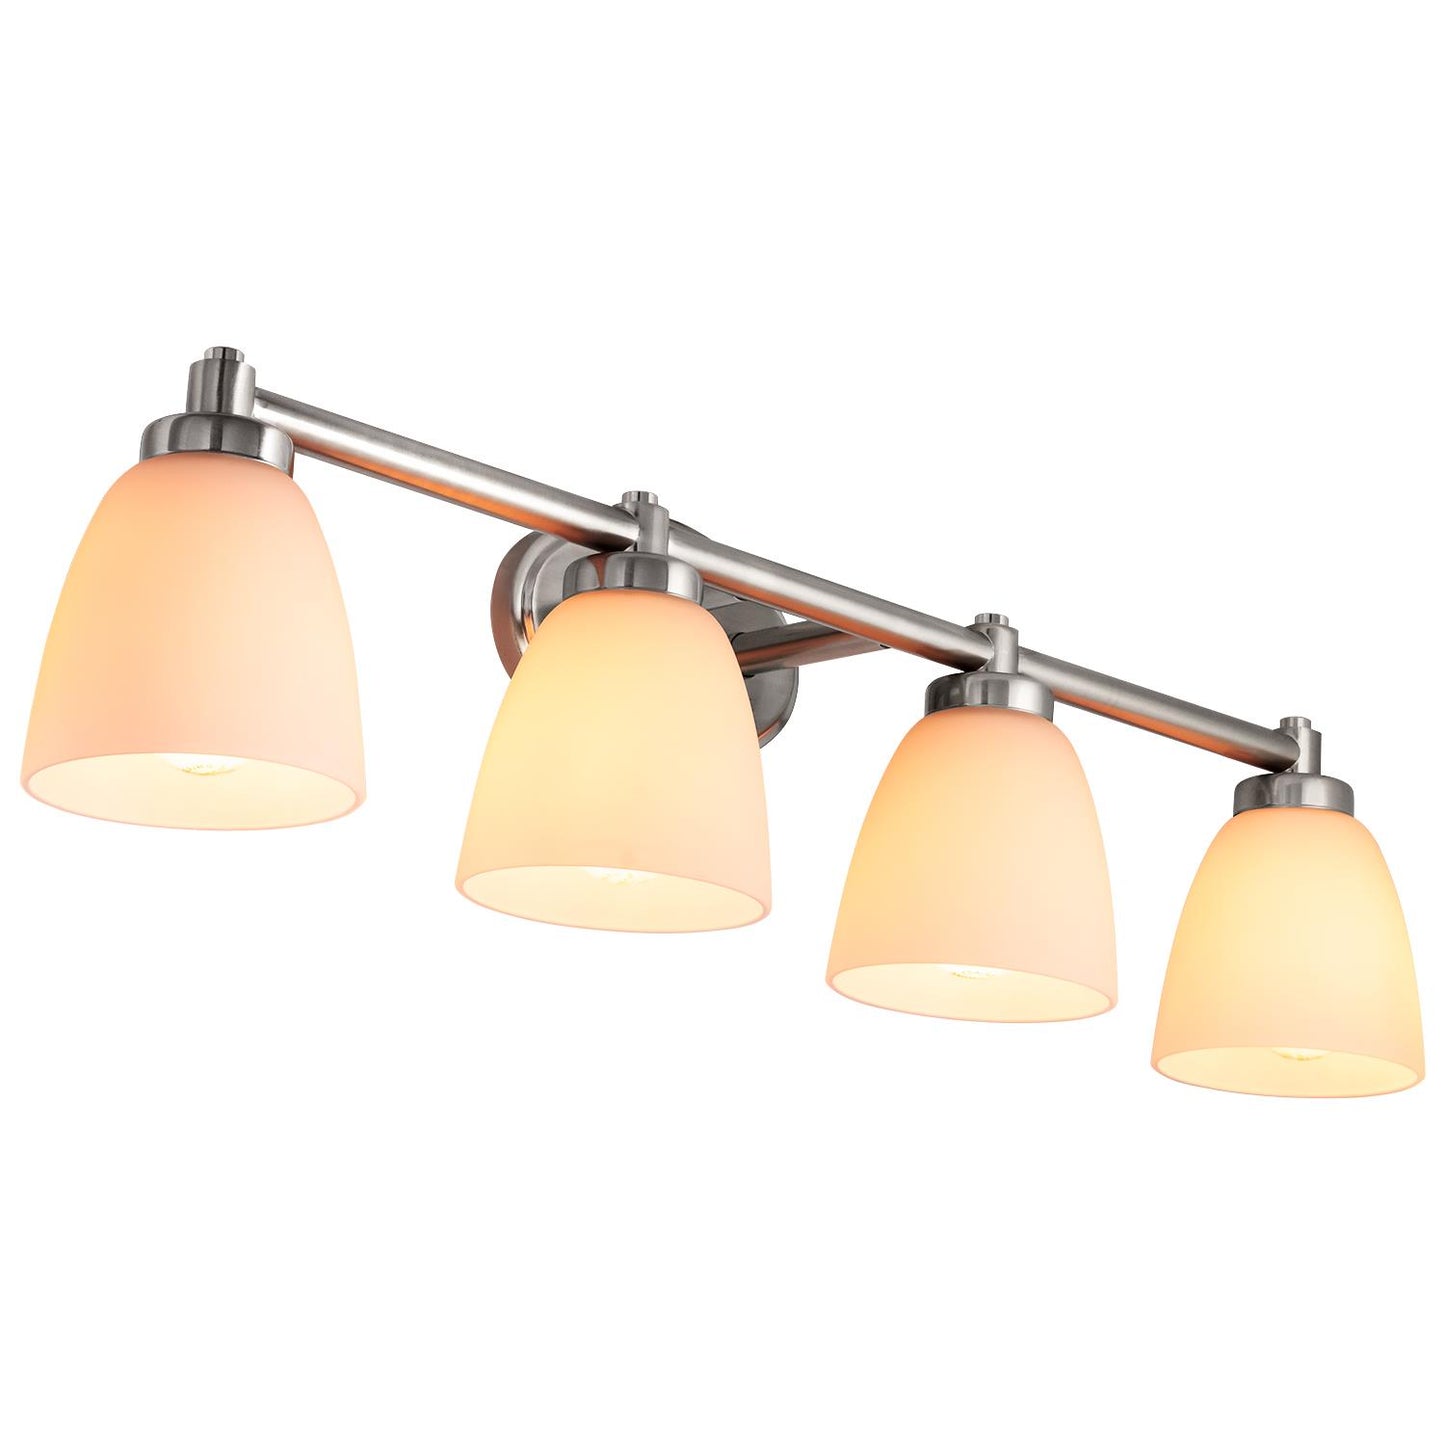 Sunlite 45060-SU Vanity Fixture Four Light 34 Inch Bar, Bell Shaped Forsted Glass , Brushed Nickel Finish